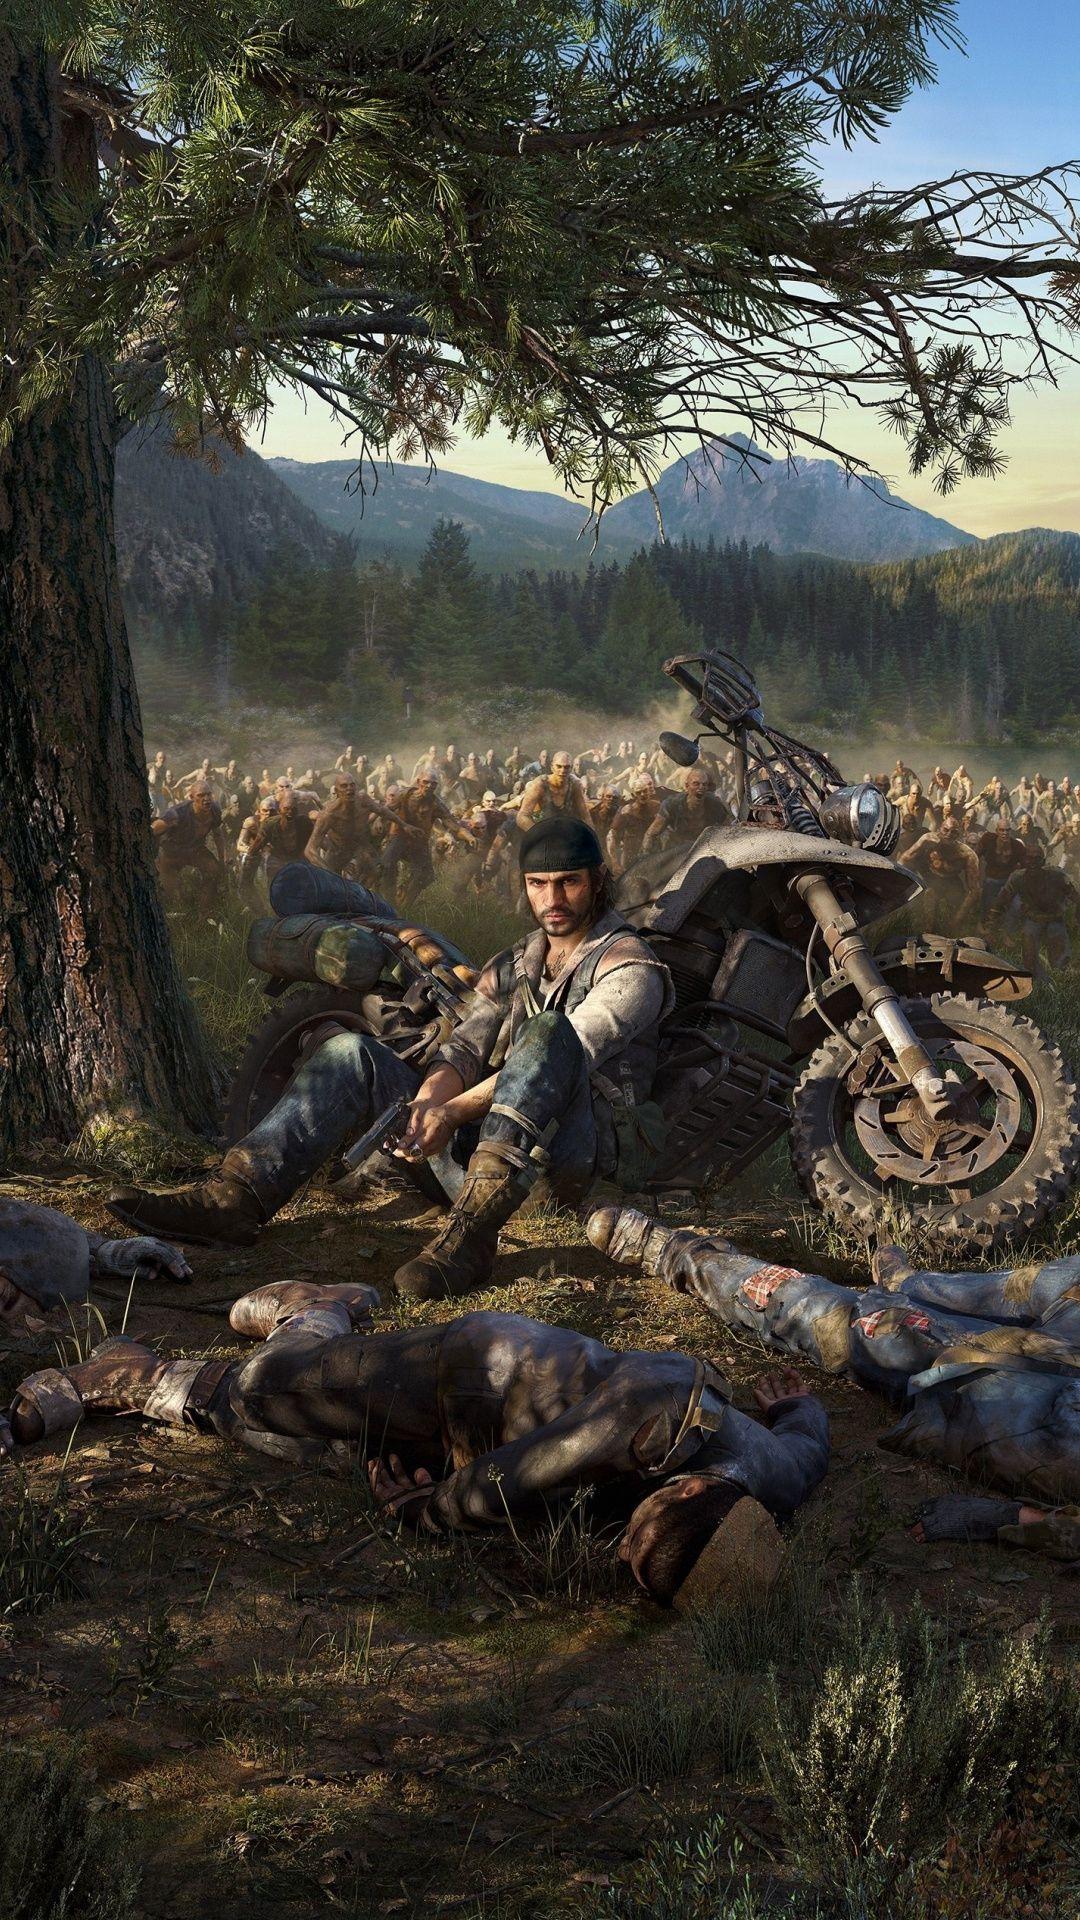 Biker, Days Gone, video game, zombies' attack, 1080x1920 wallpaper